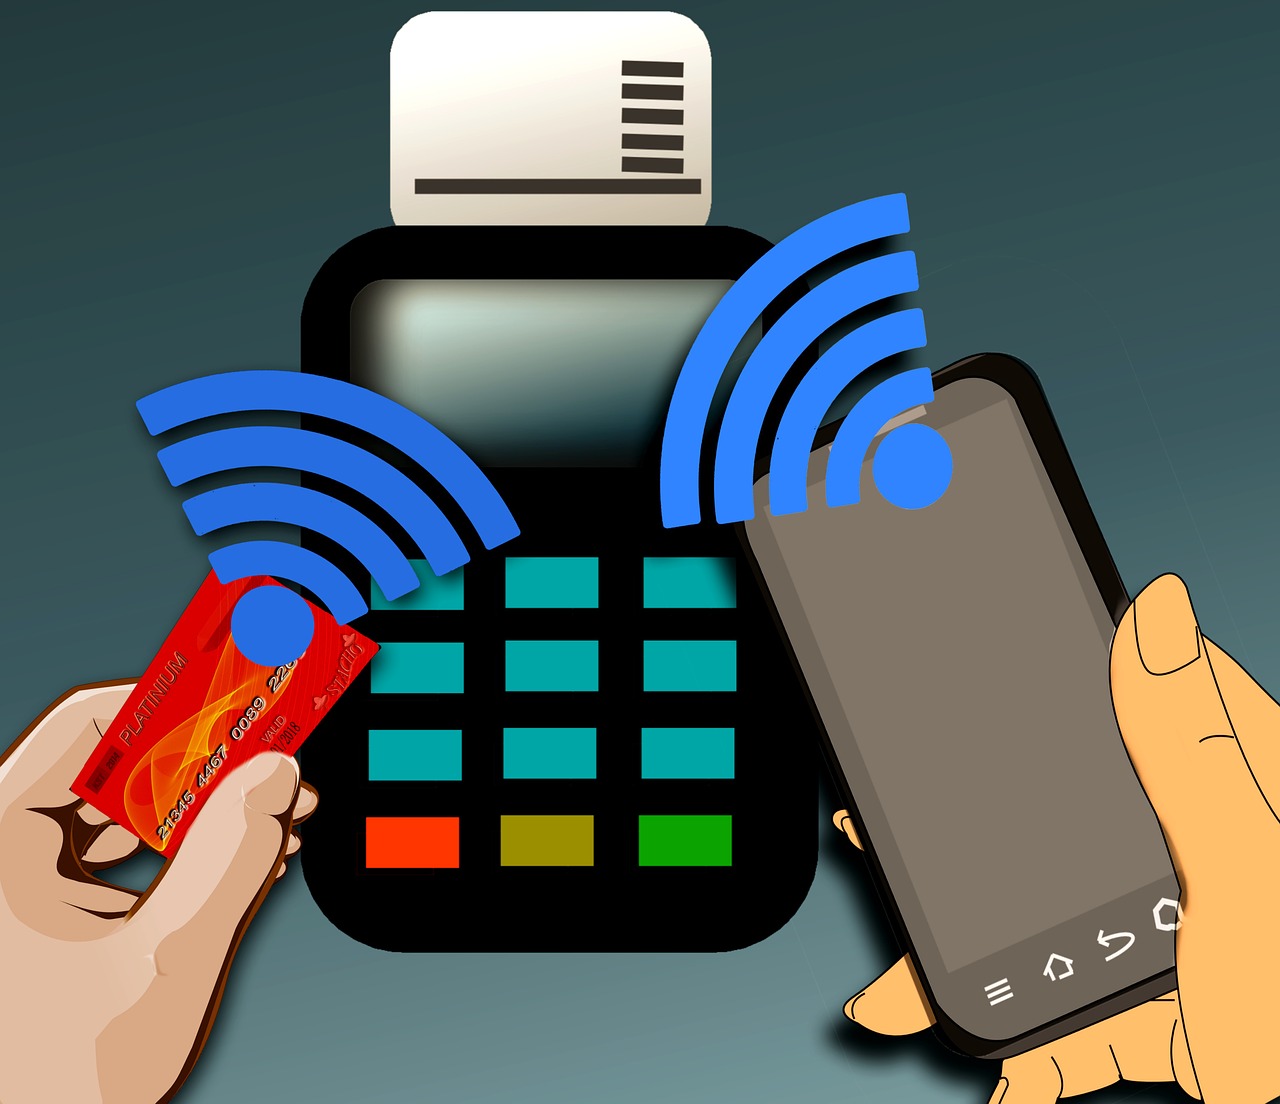 payment-systems-g4879457bd_1280